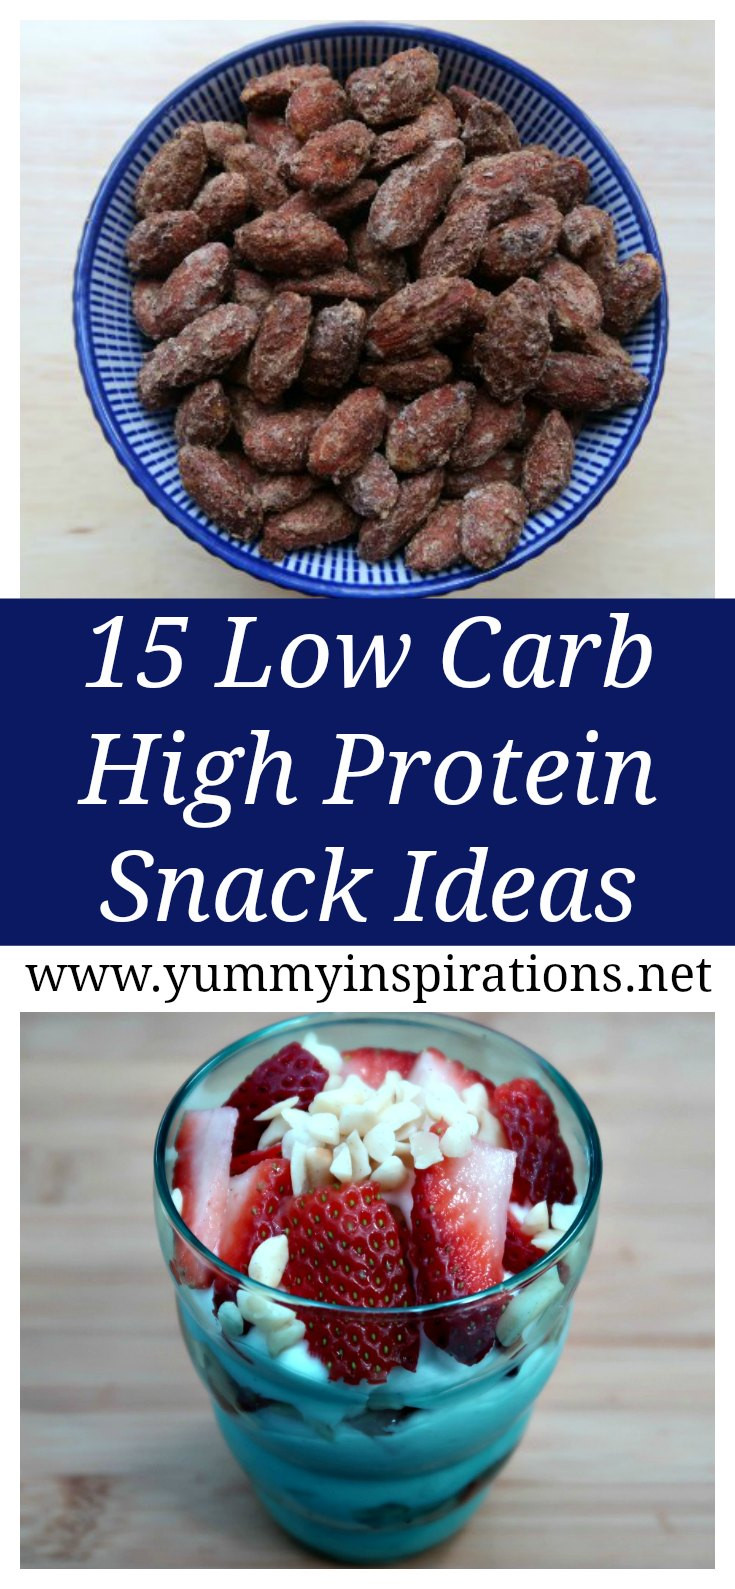 Low Carb Keto Snacks
 15 Low Carb High Protein Snacks Ideas For Easy Keto Diet